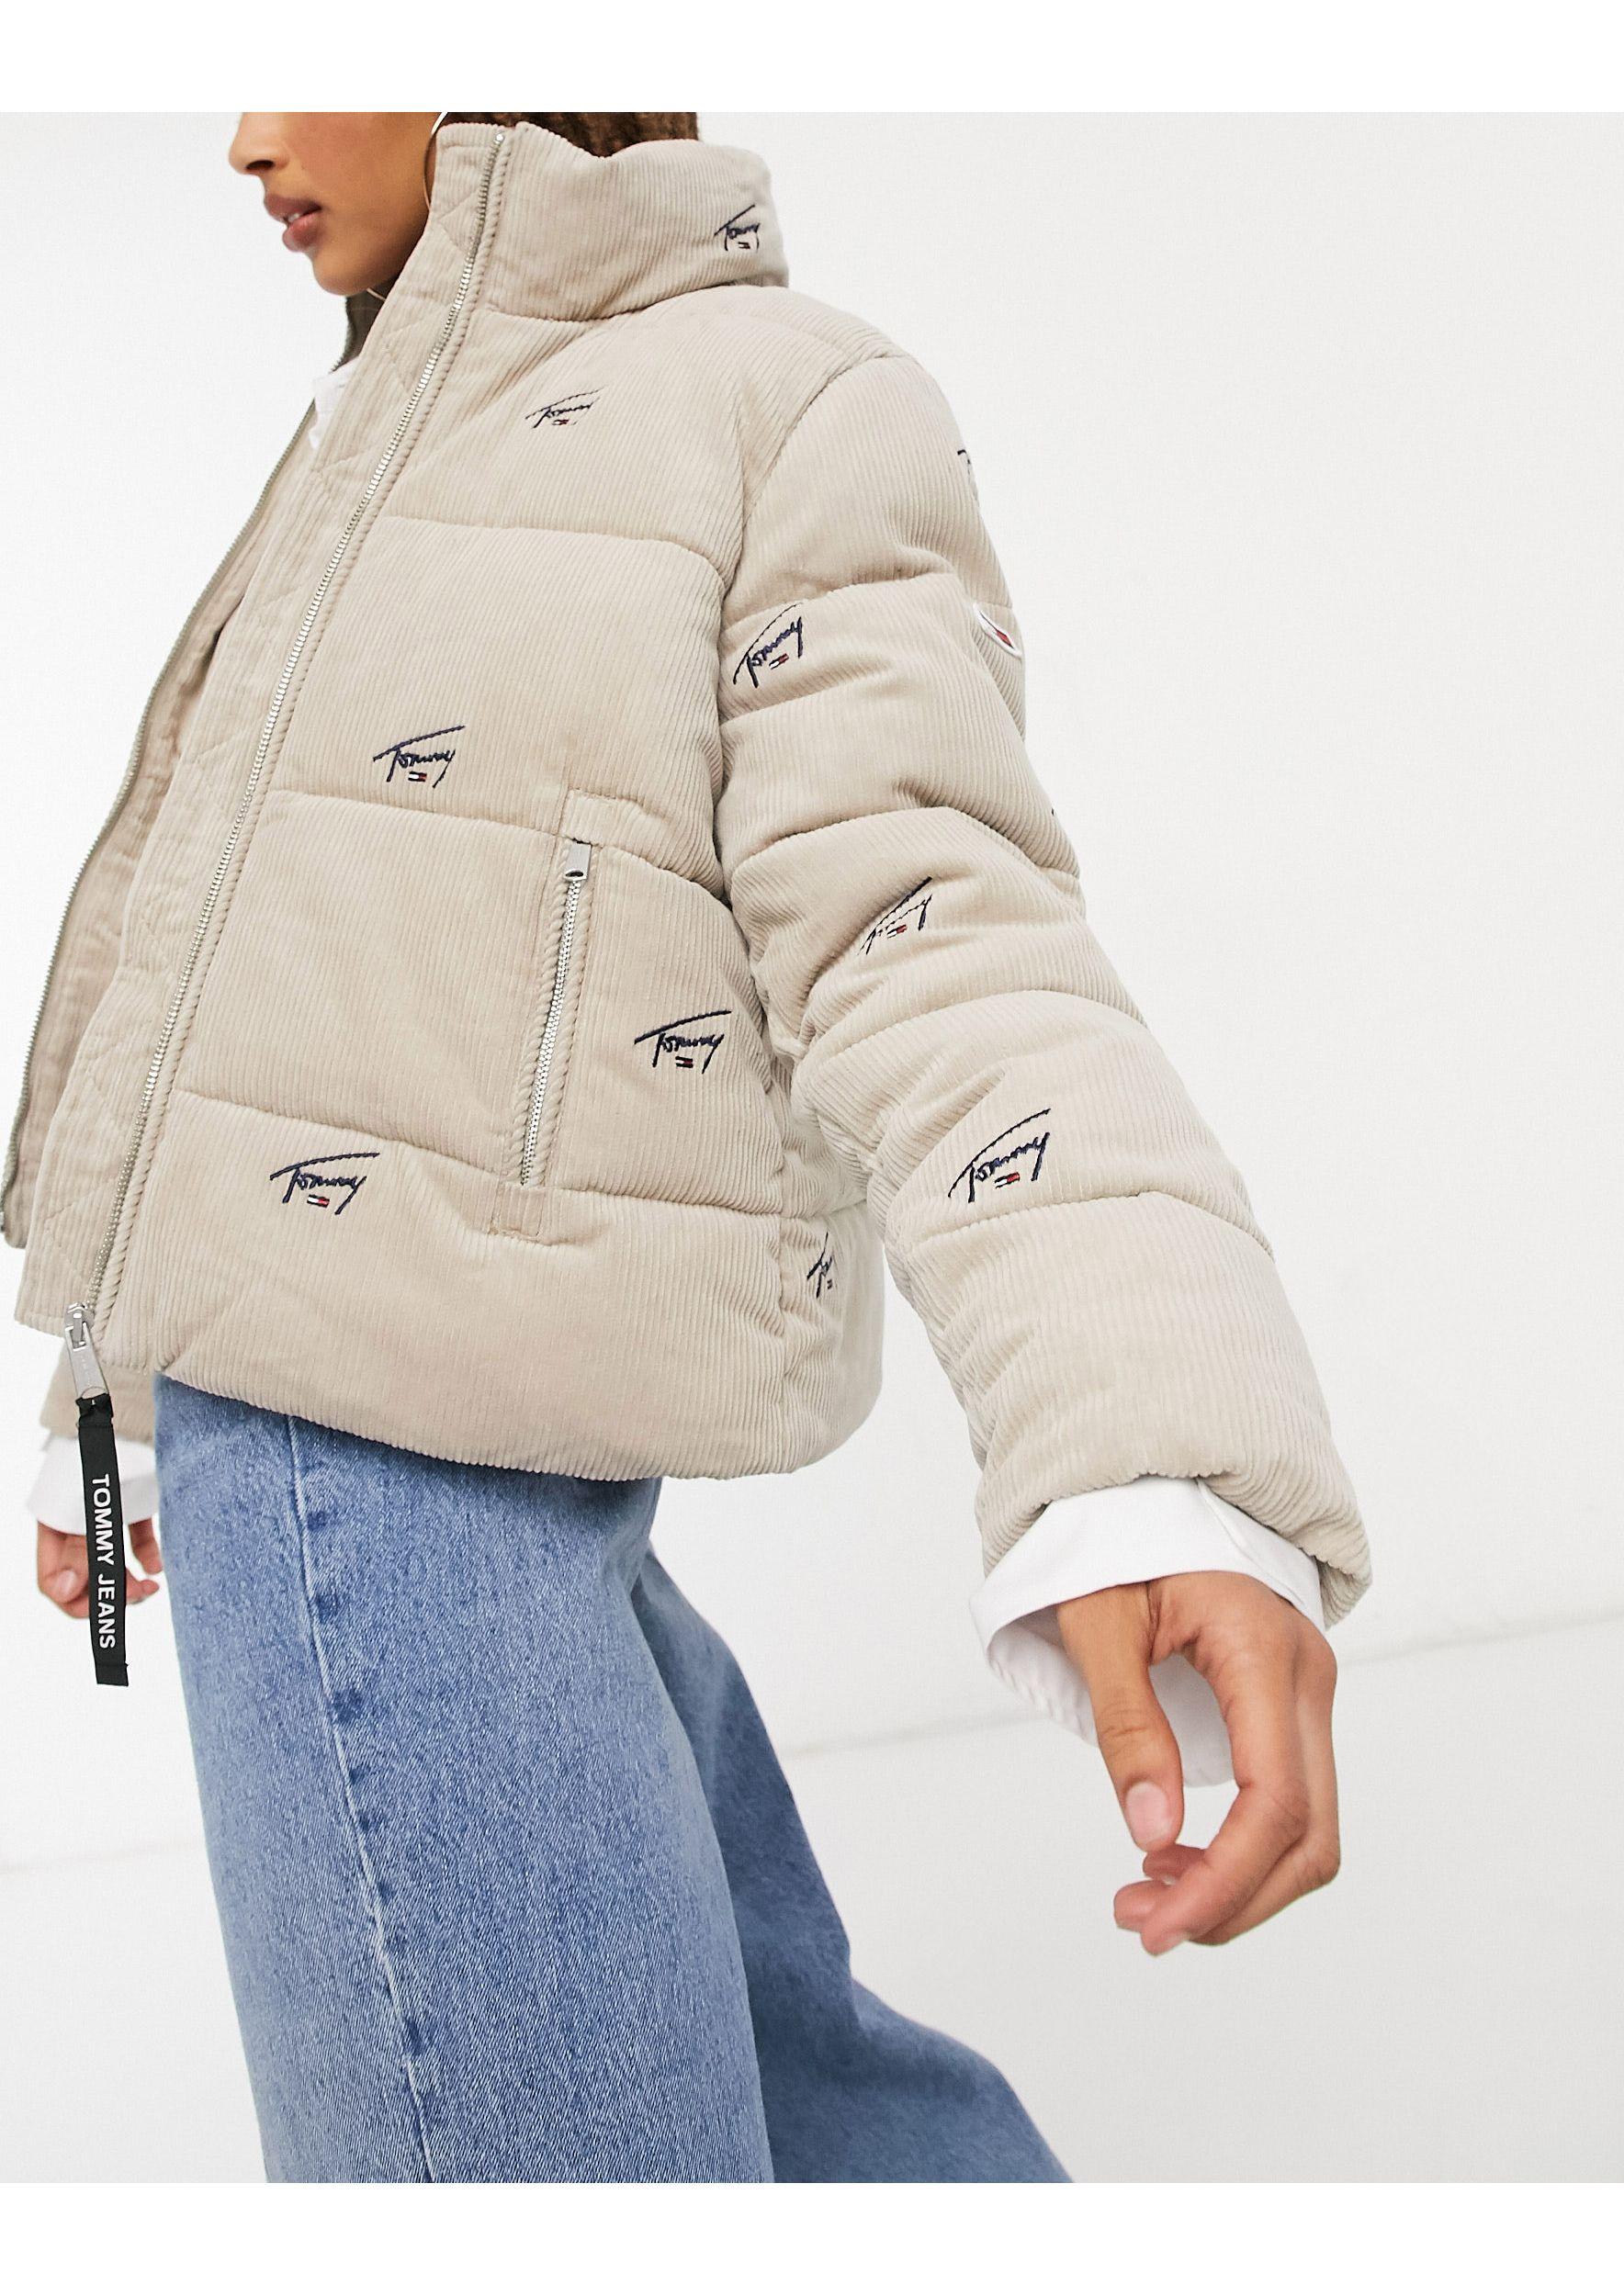 Tommy Hilfiger All Over Signature Logo Cord Puffer in Natural | Lyst UK